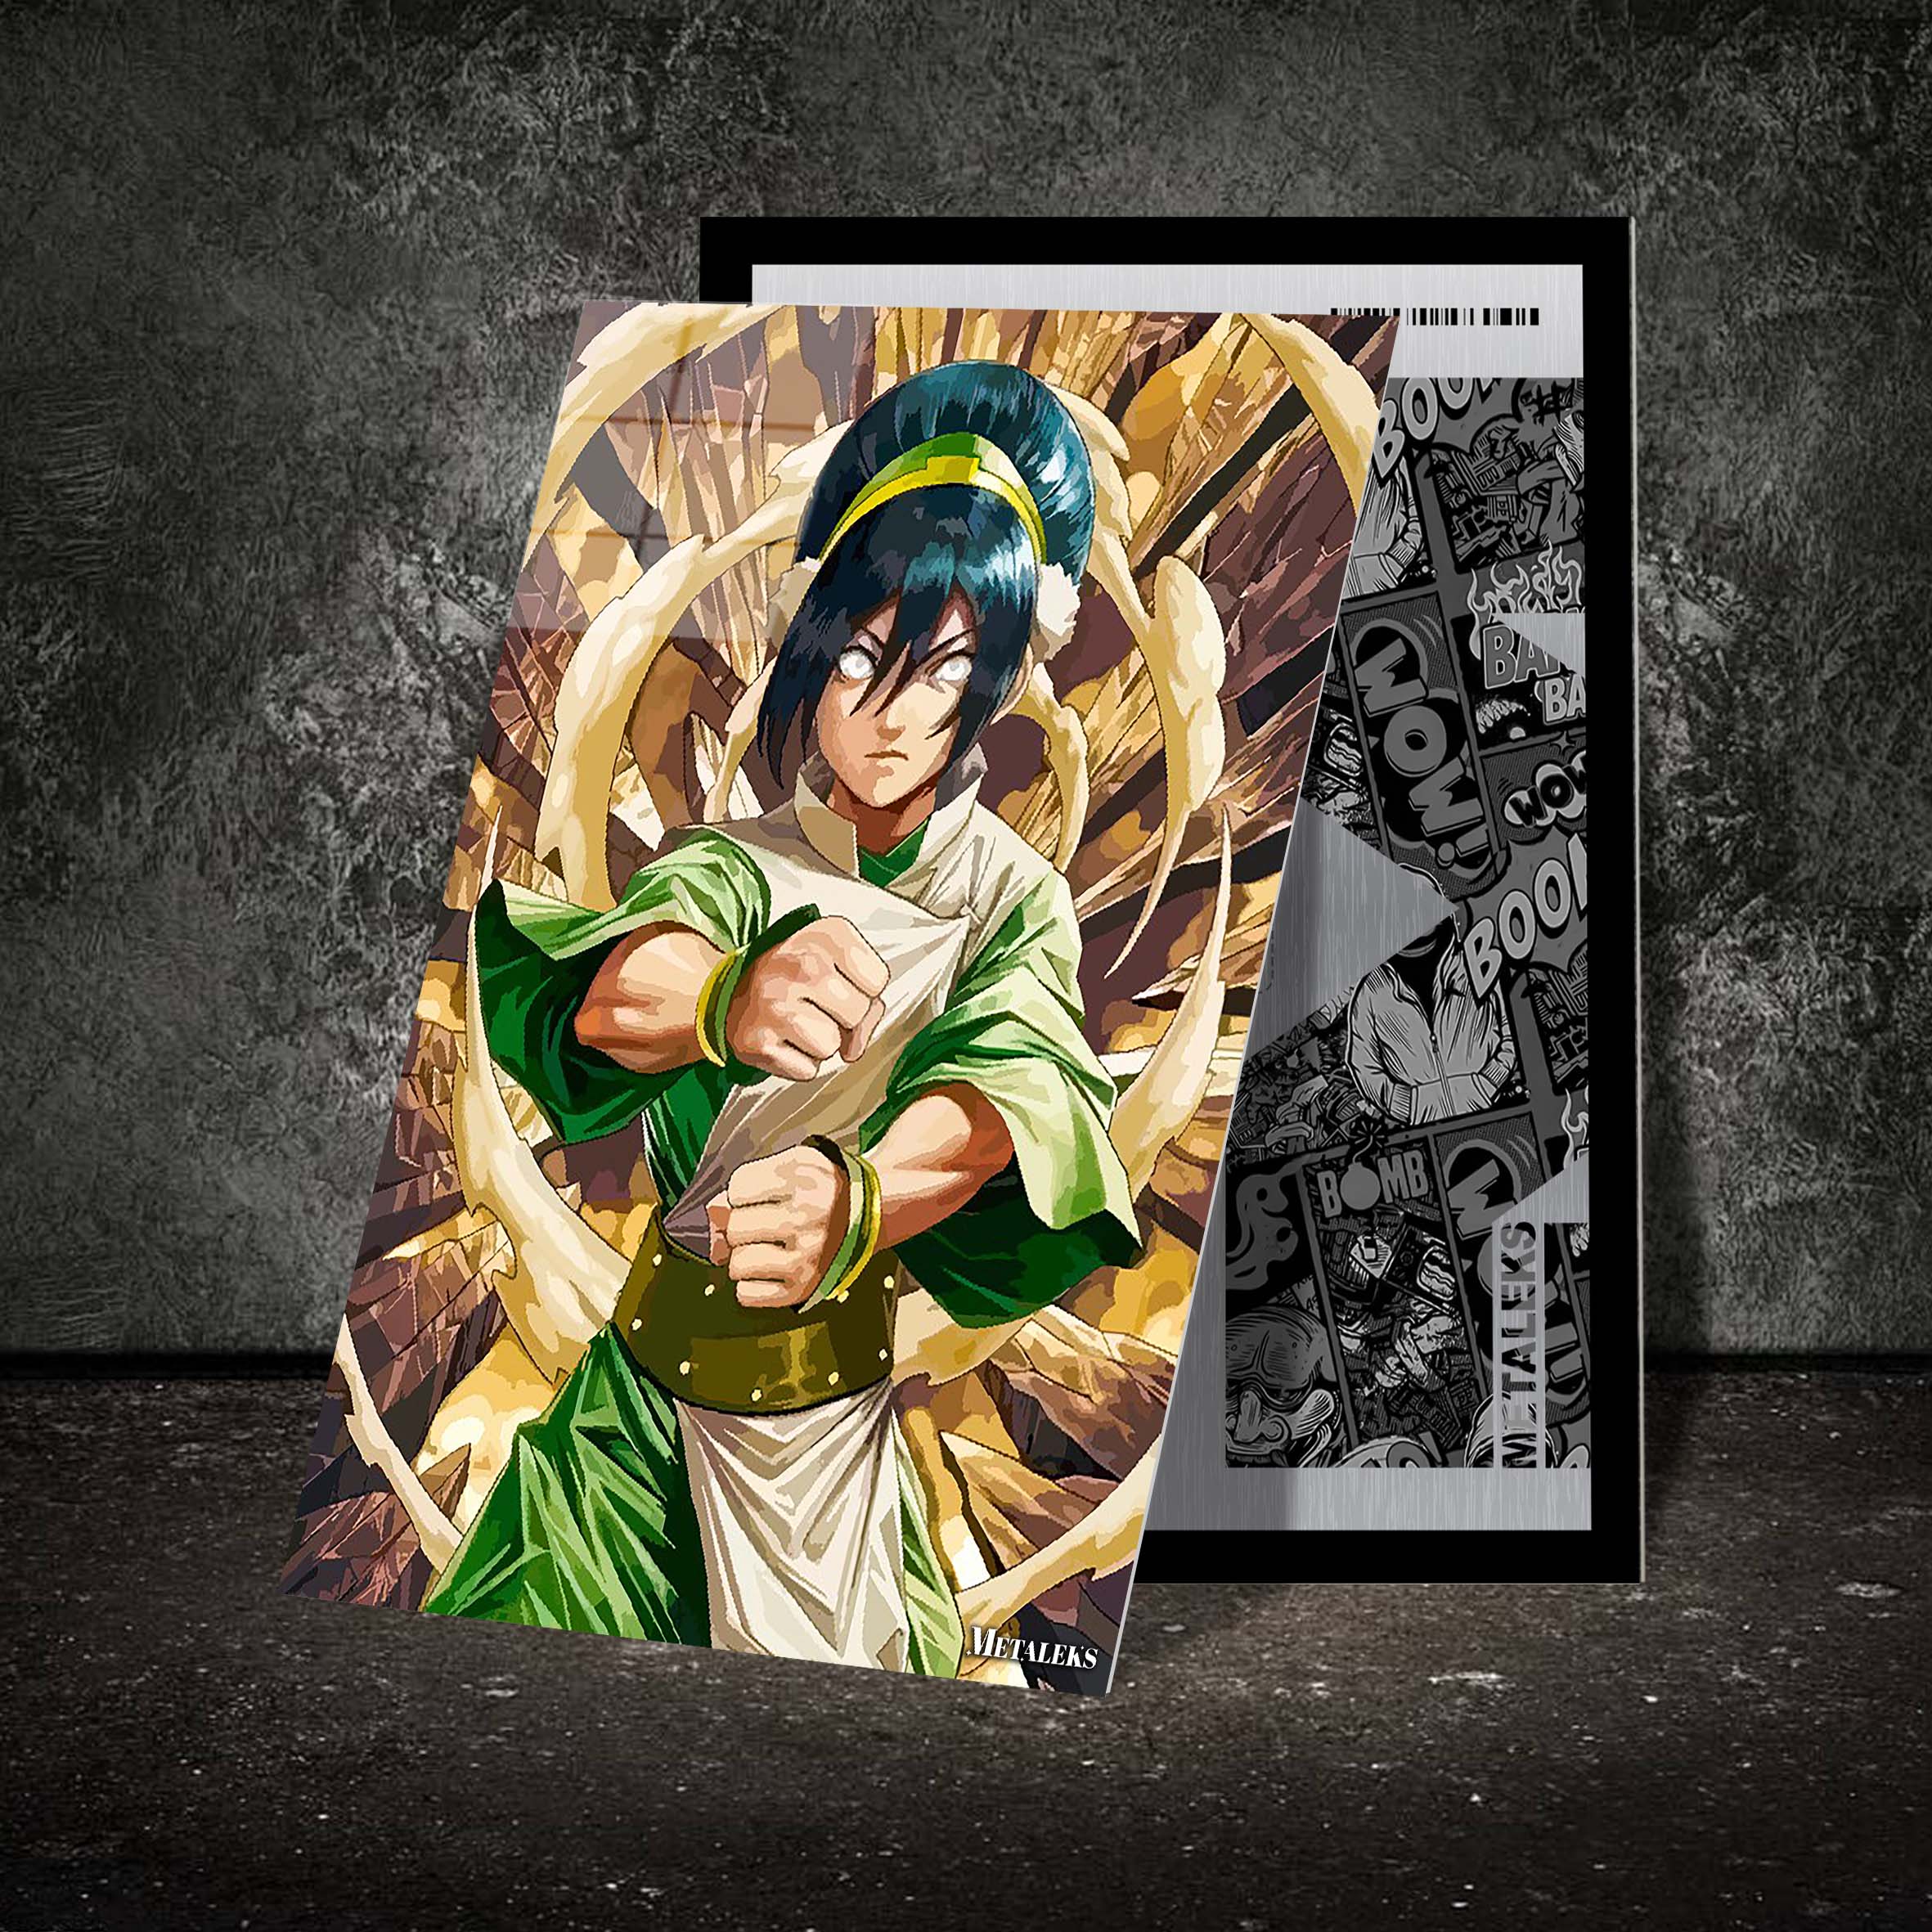 Avatar Toph Beifong-designed by @Nadhifsaoqi